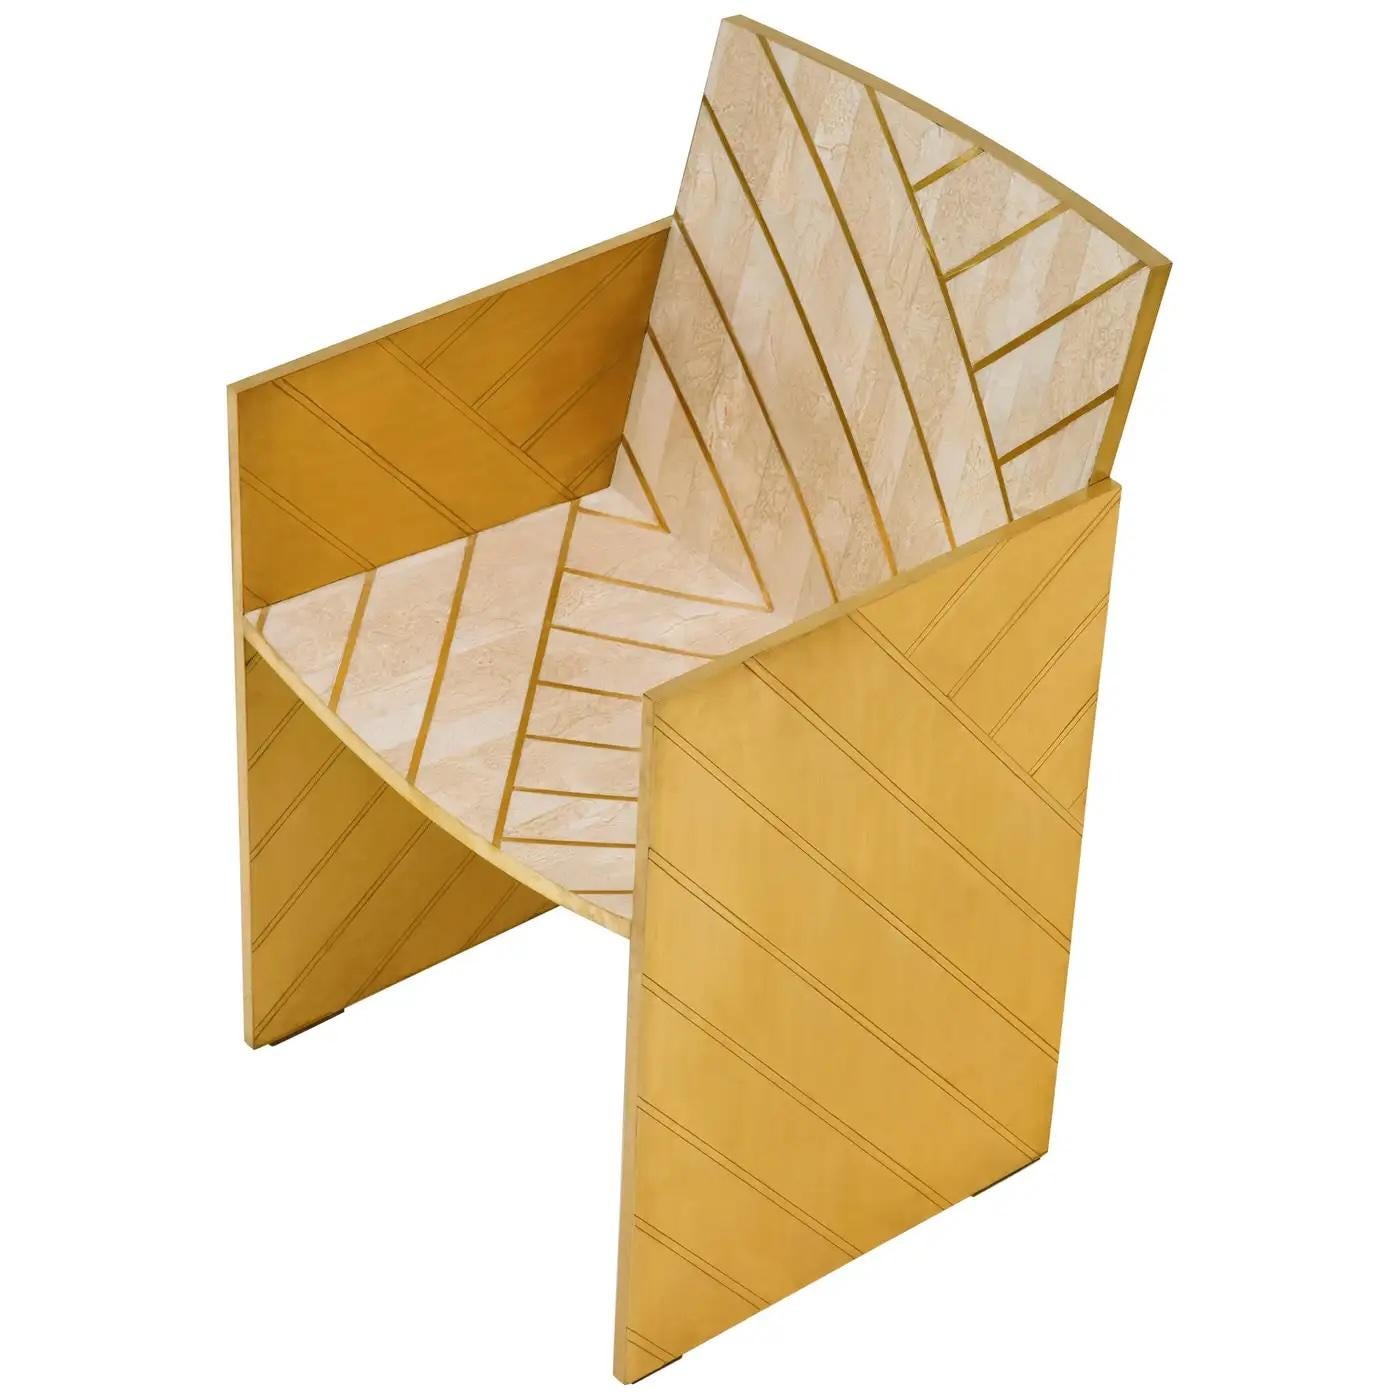 Nesso Dining Chair with Brass Inlay by Matteo Cibic is a beautiful chair in pearly resin with geometric brass inlay. It can be matched beautifully with the Nesso dining table. It comes in three colors, beige, gray and mint and can be customised upon